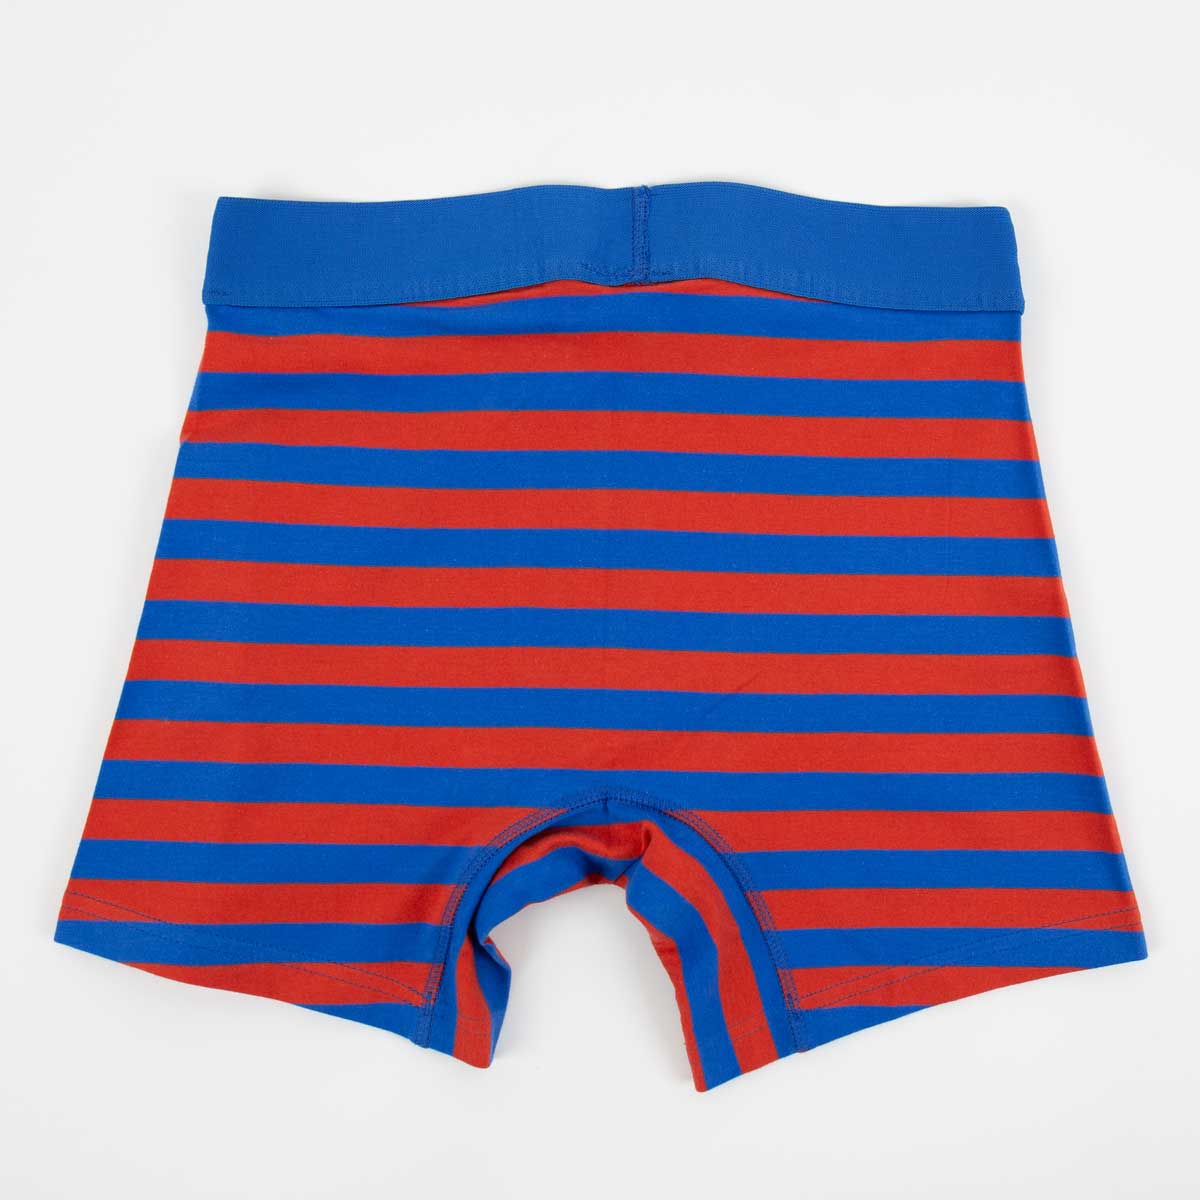 AWOC Boxers, red/blue